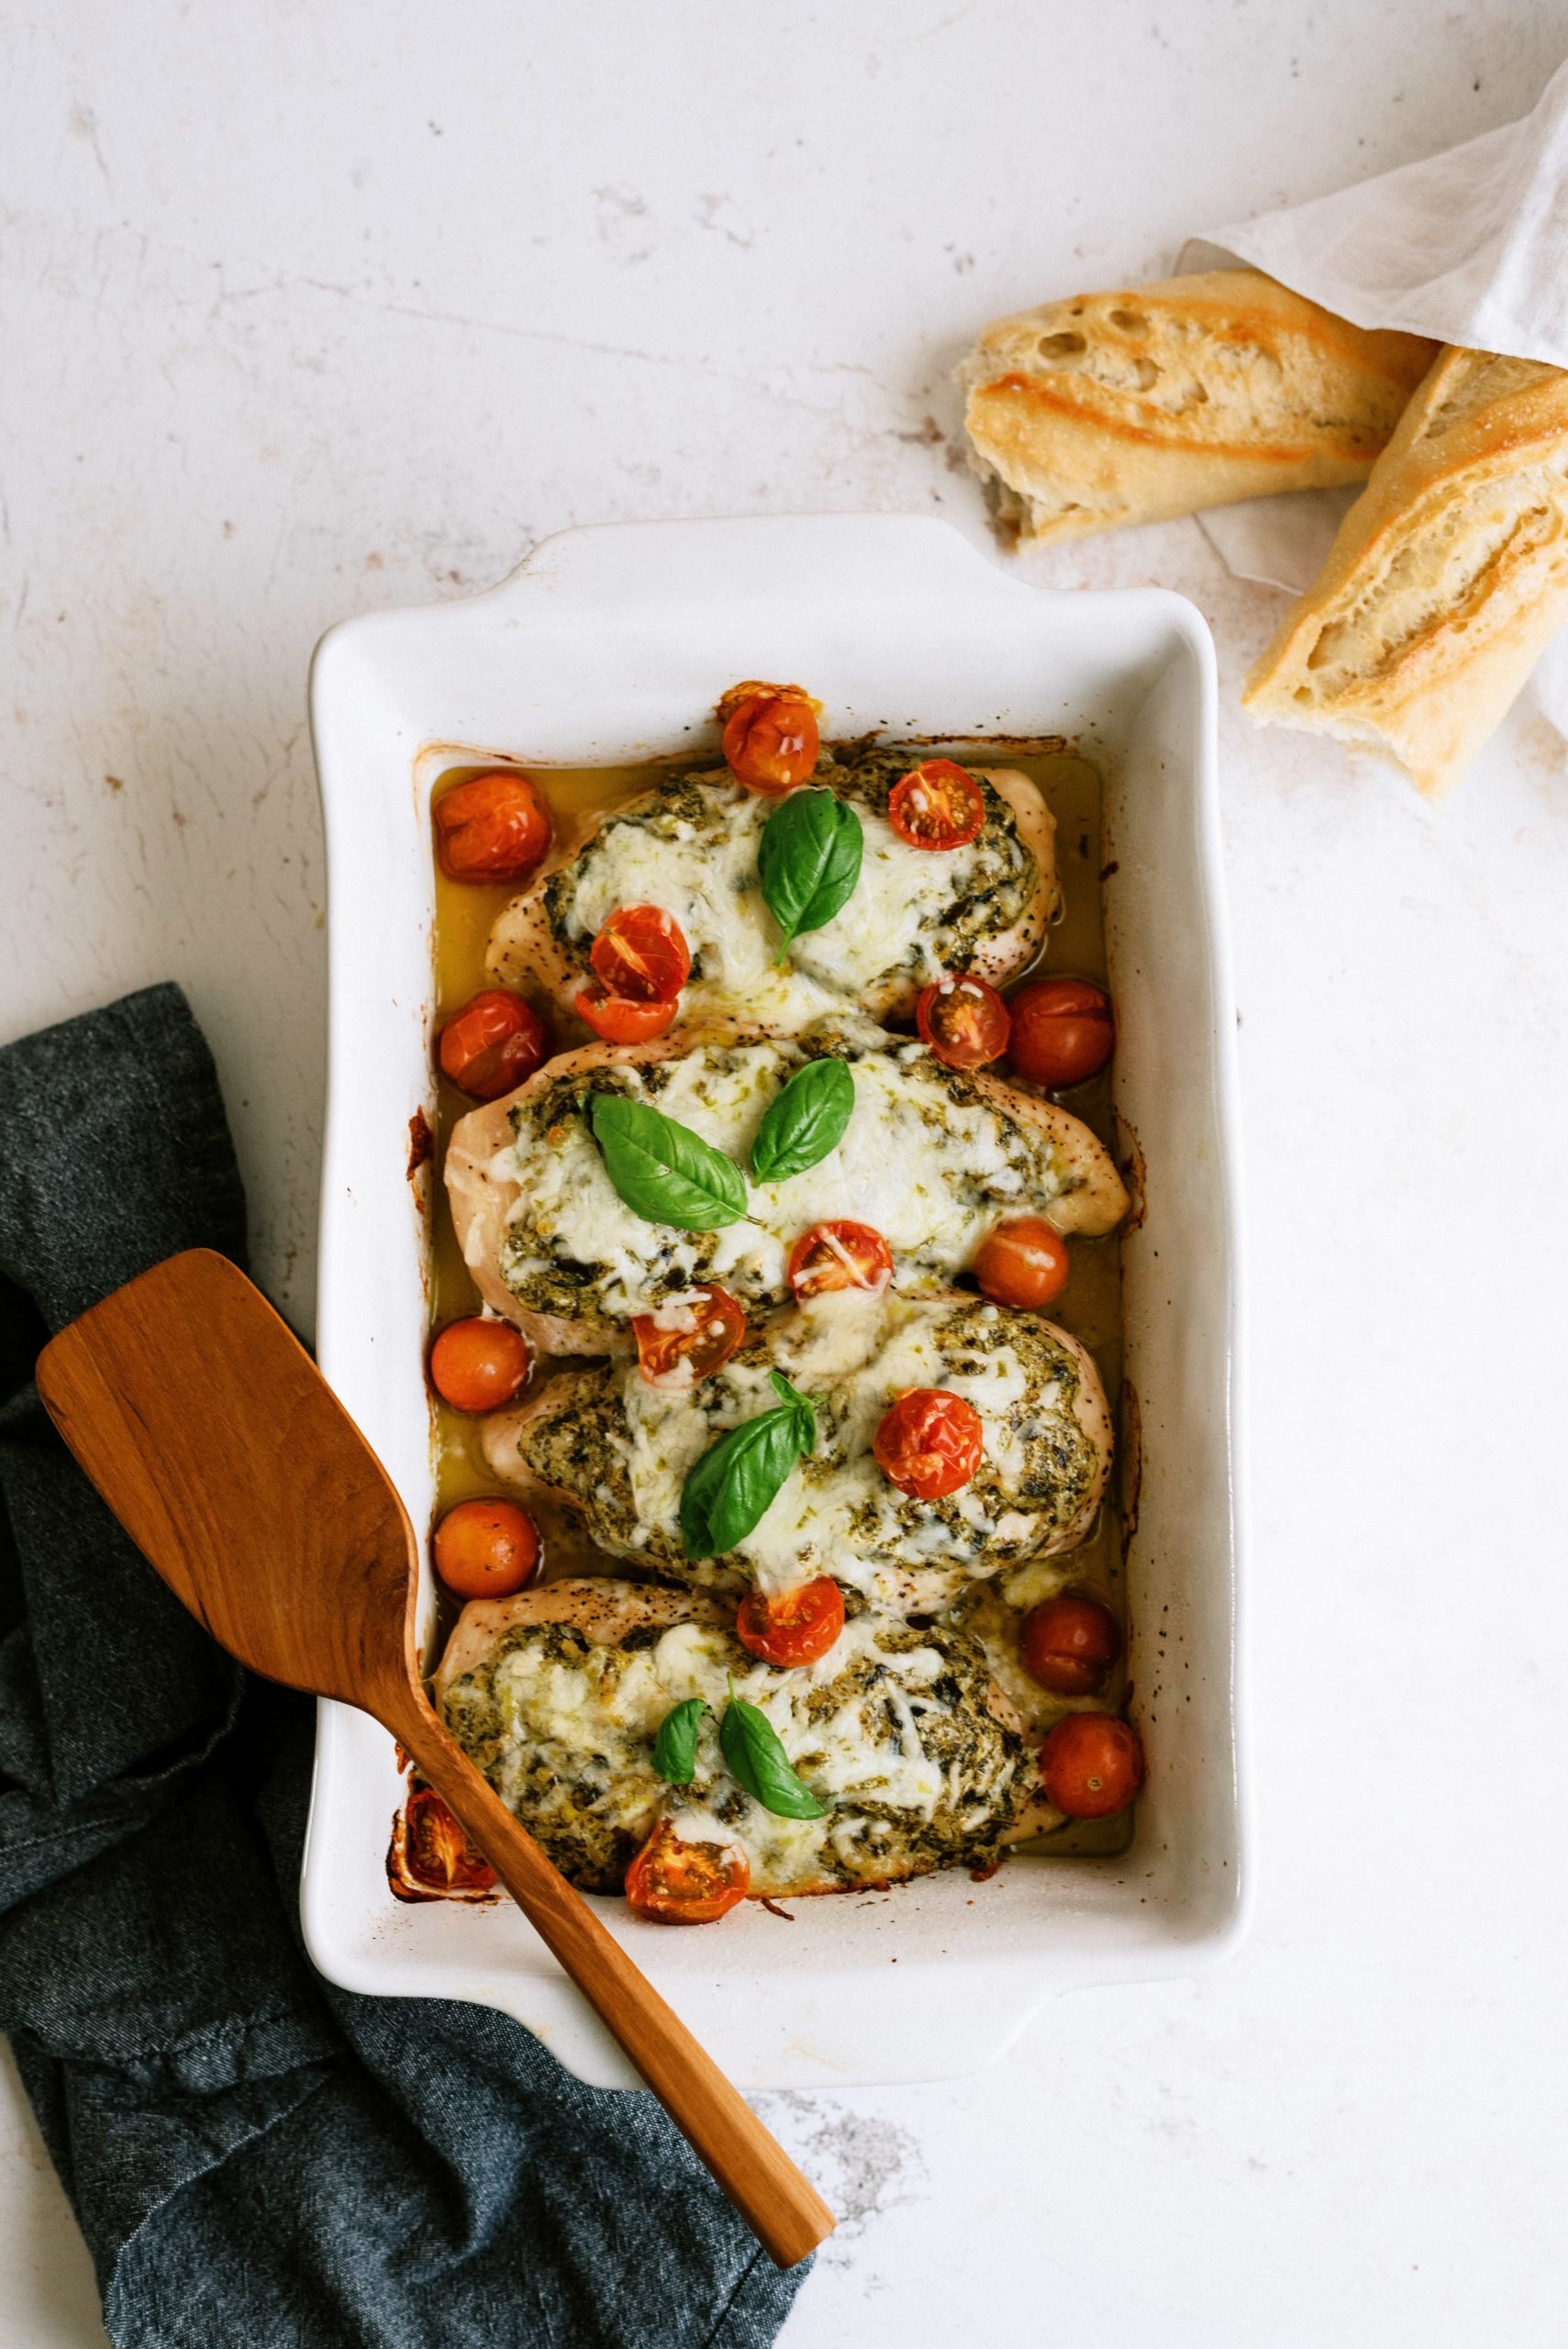 Pan of Easy Pesto Chicken Bake with bread on the side